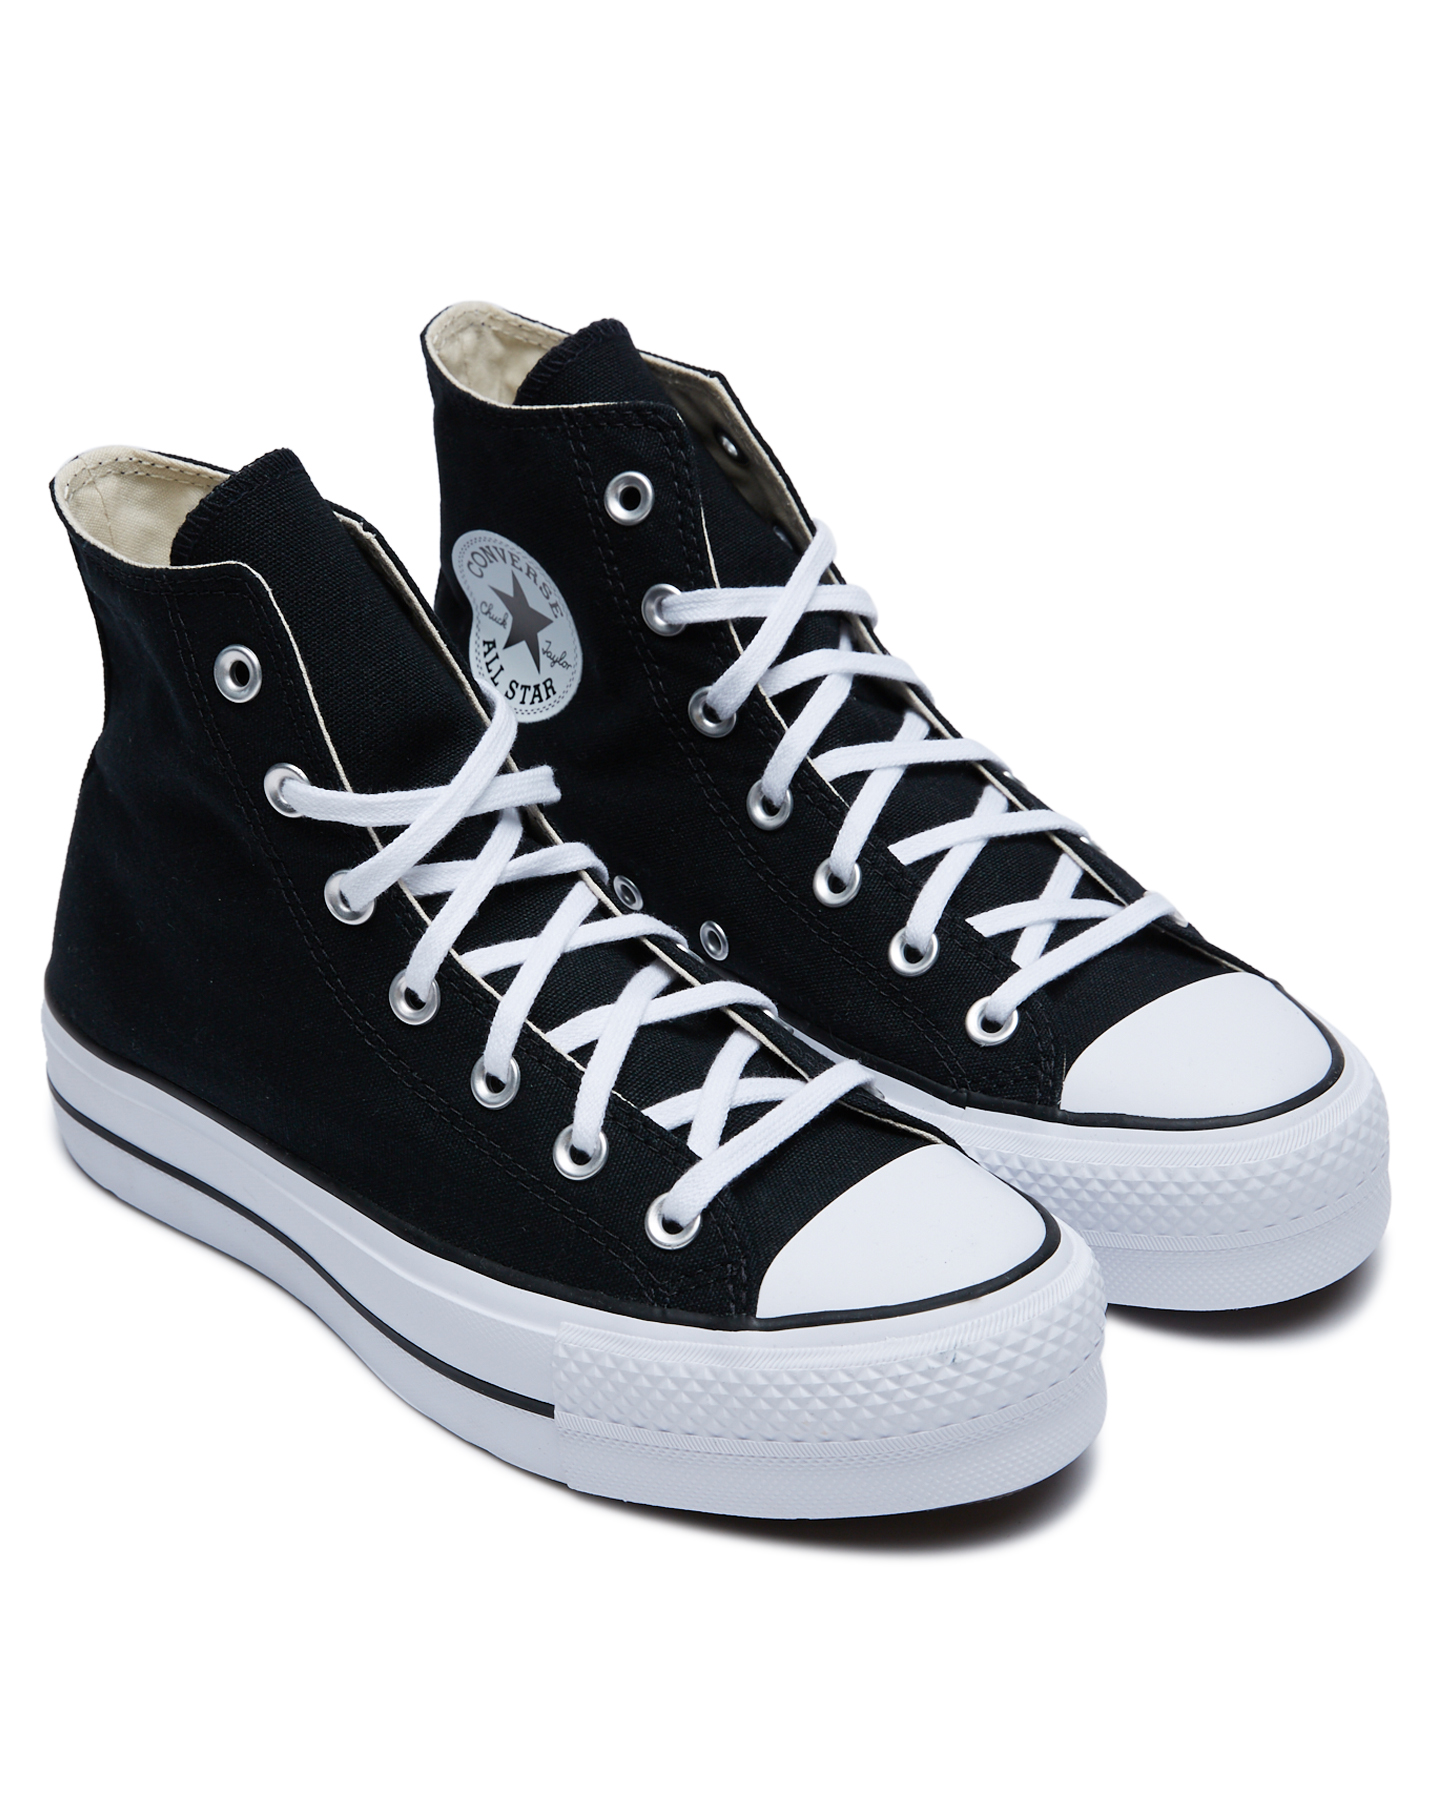 Shoes That Look Like Converse » Technicalmirchi